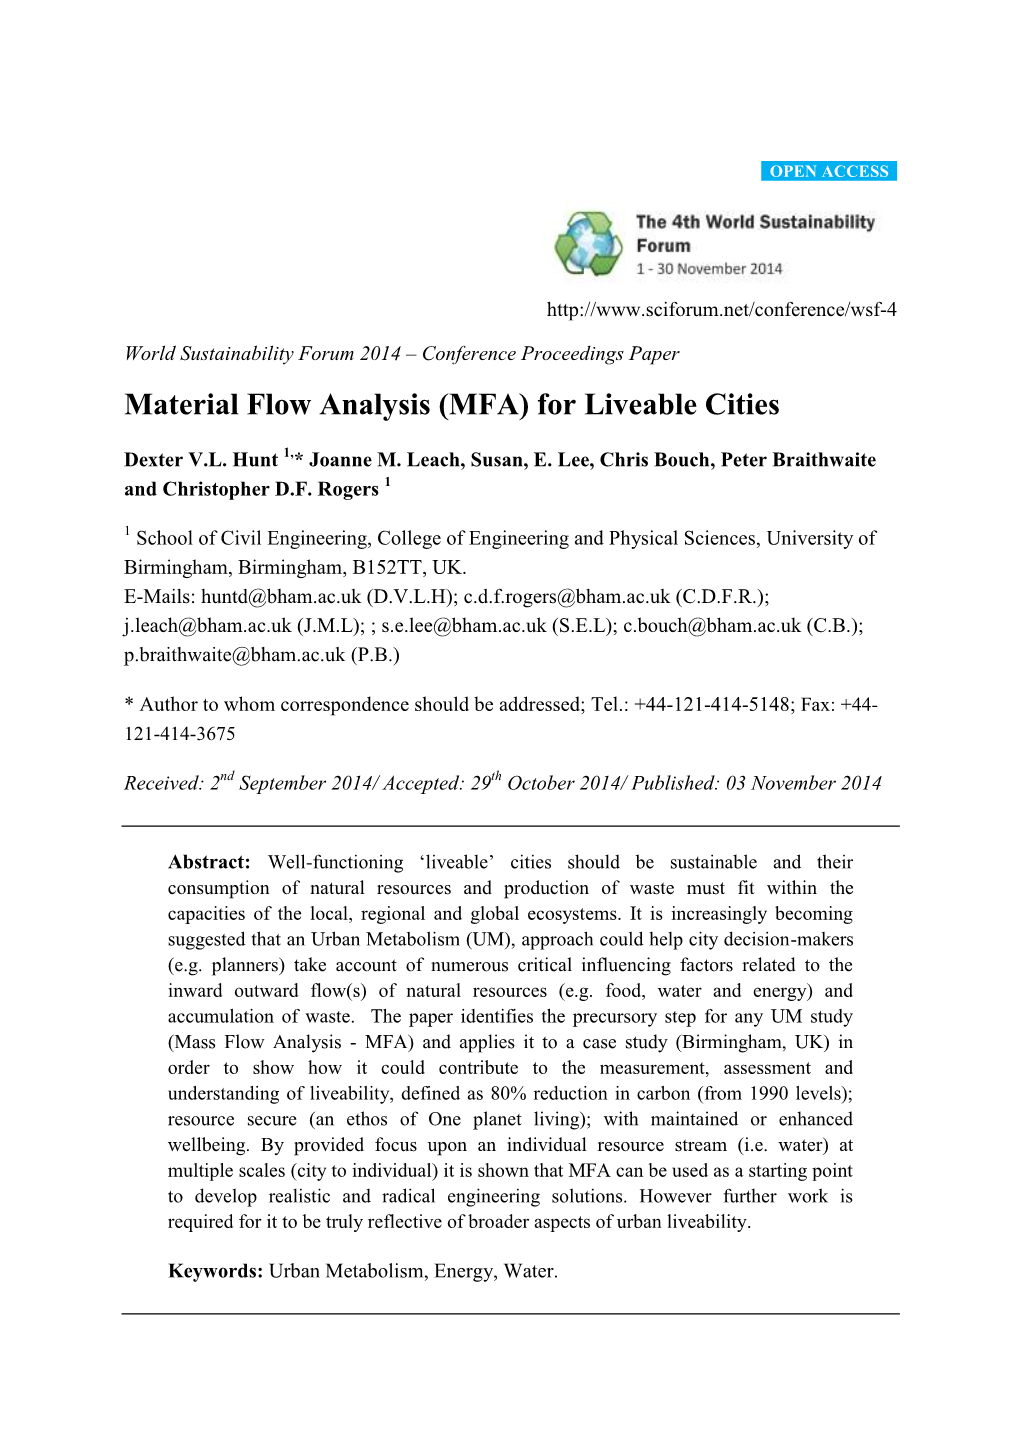 Material Flow Analysis (MFA) for Liveable Cities